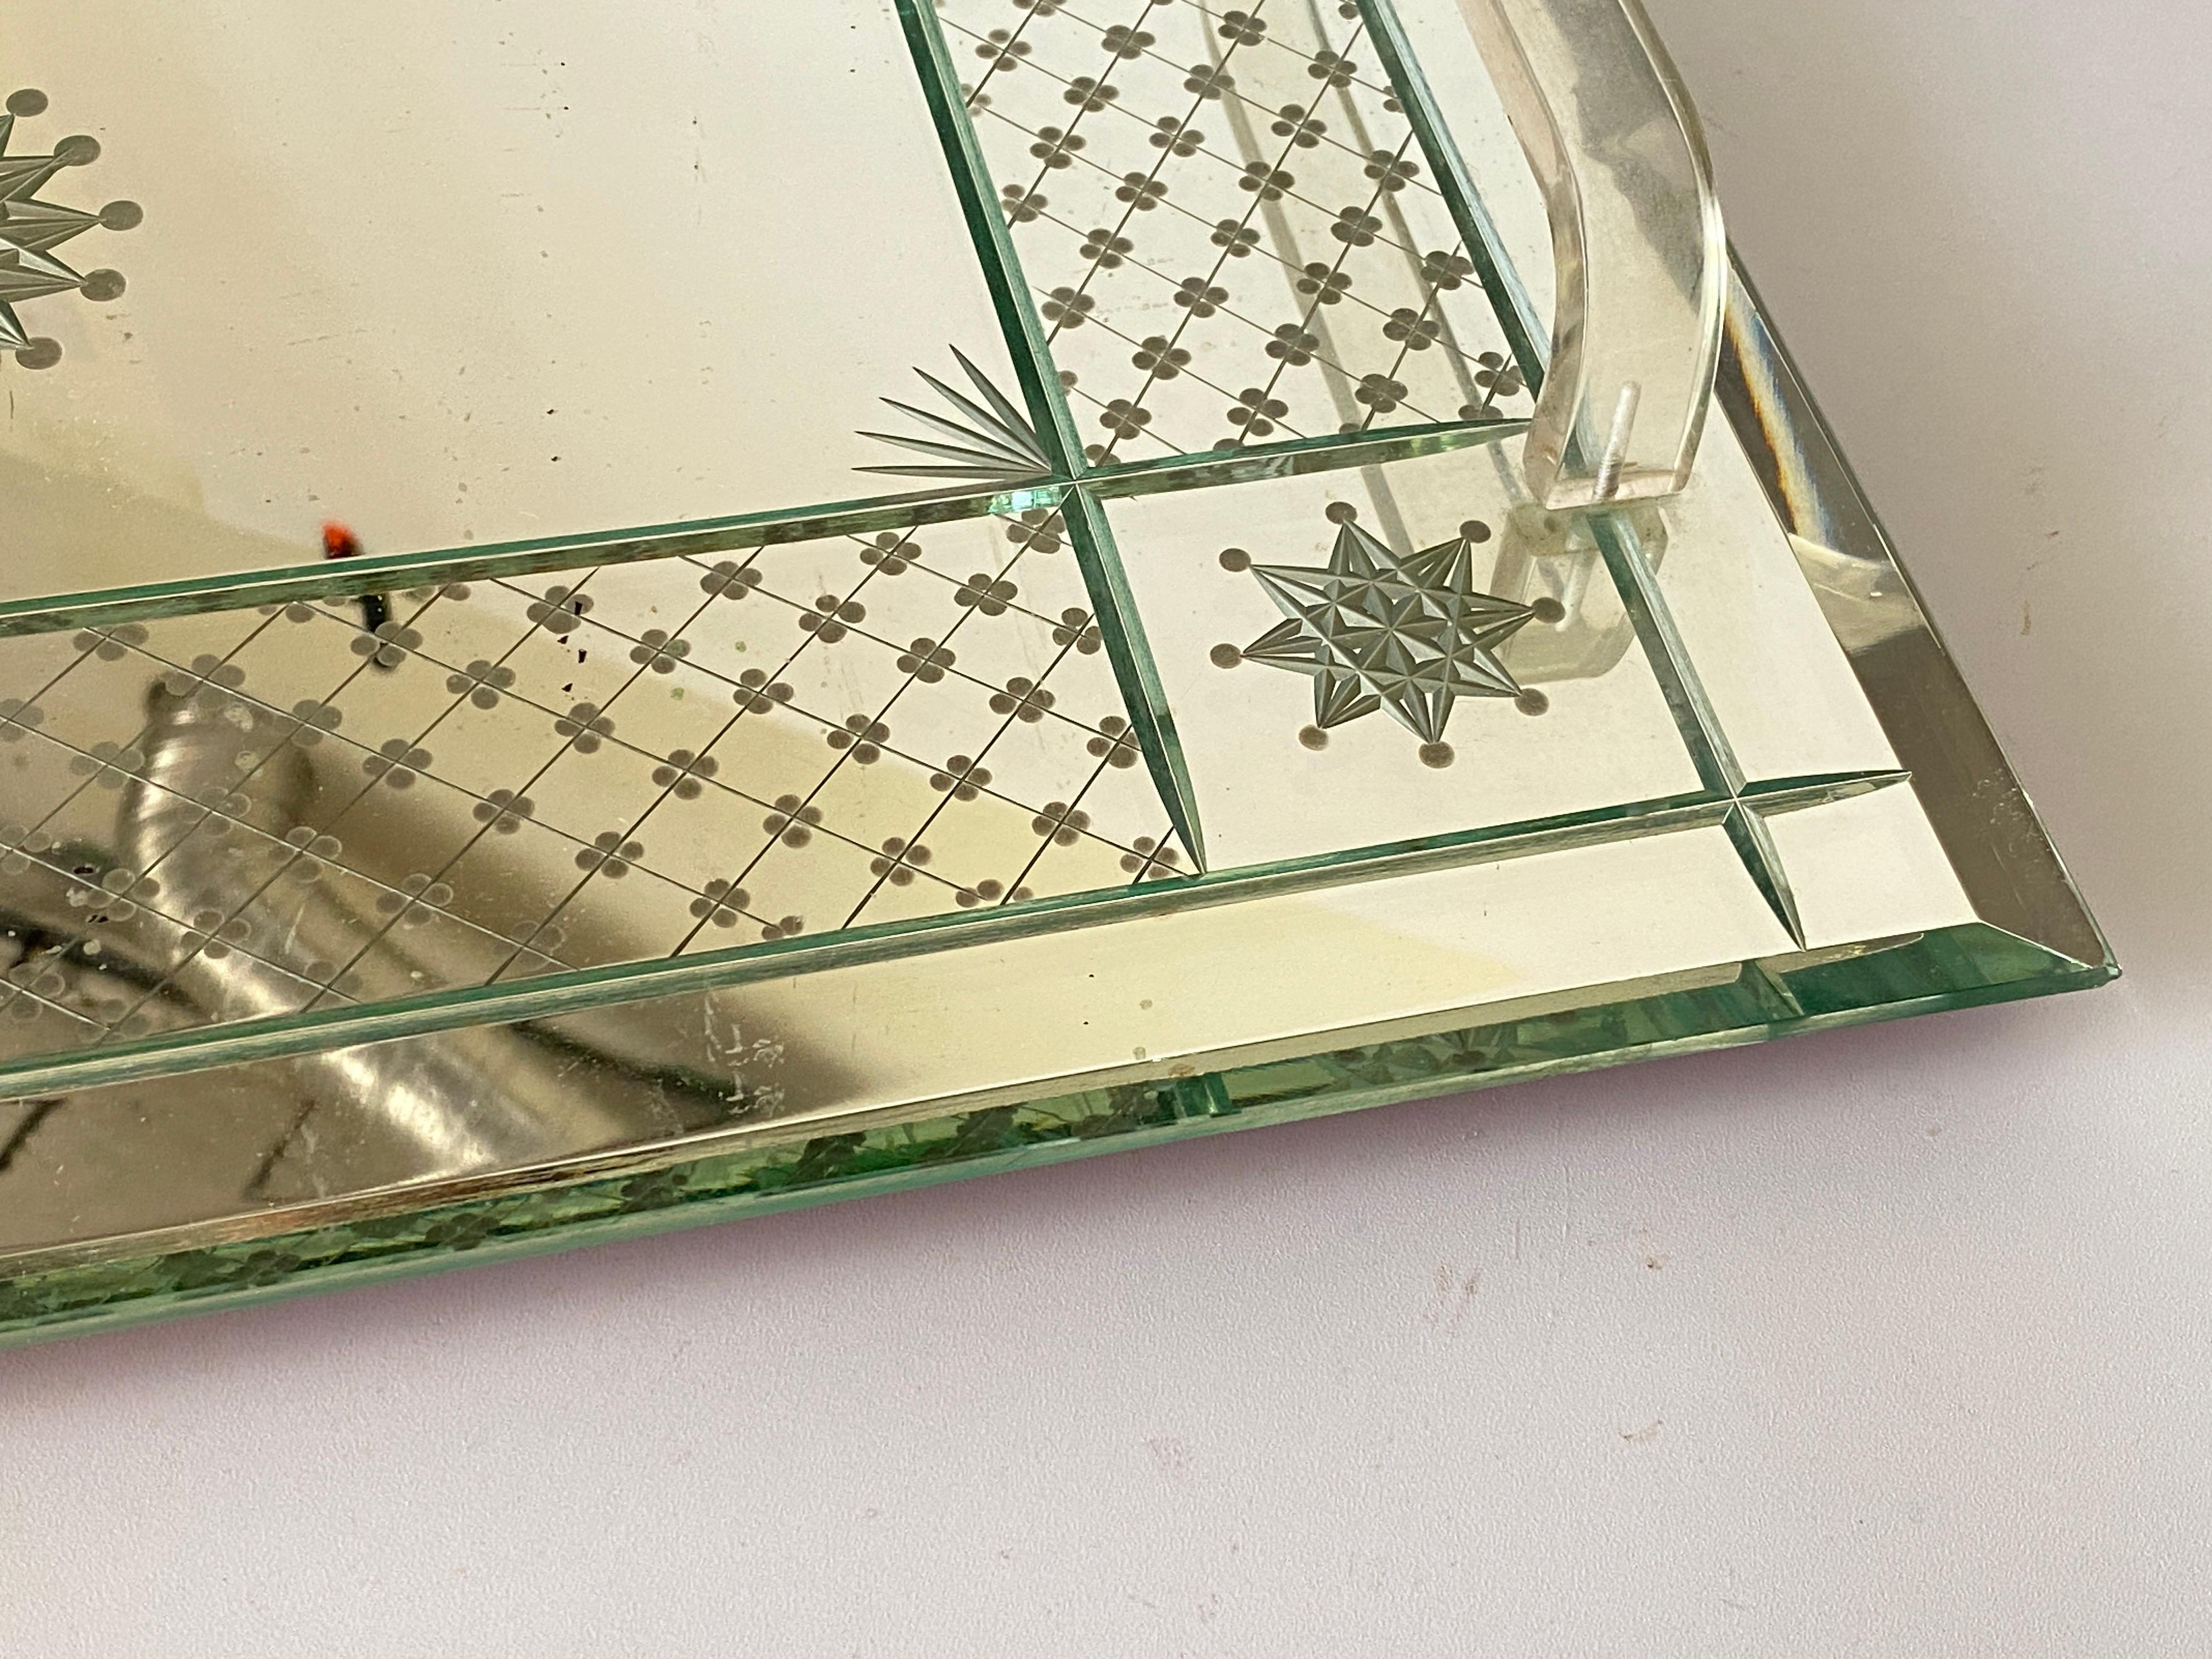 French Art Deco Tray, Beveled Mirror, Silver Color, Bakelite Handles, circa 1940 For Sale 7